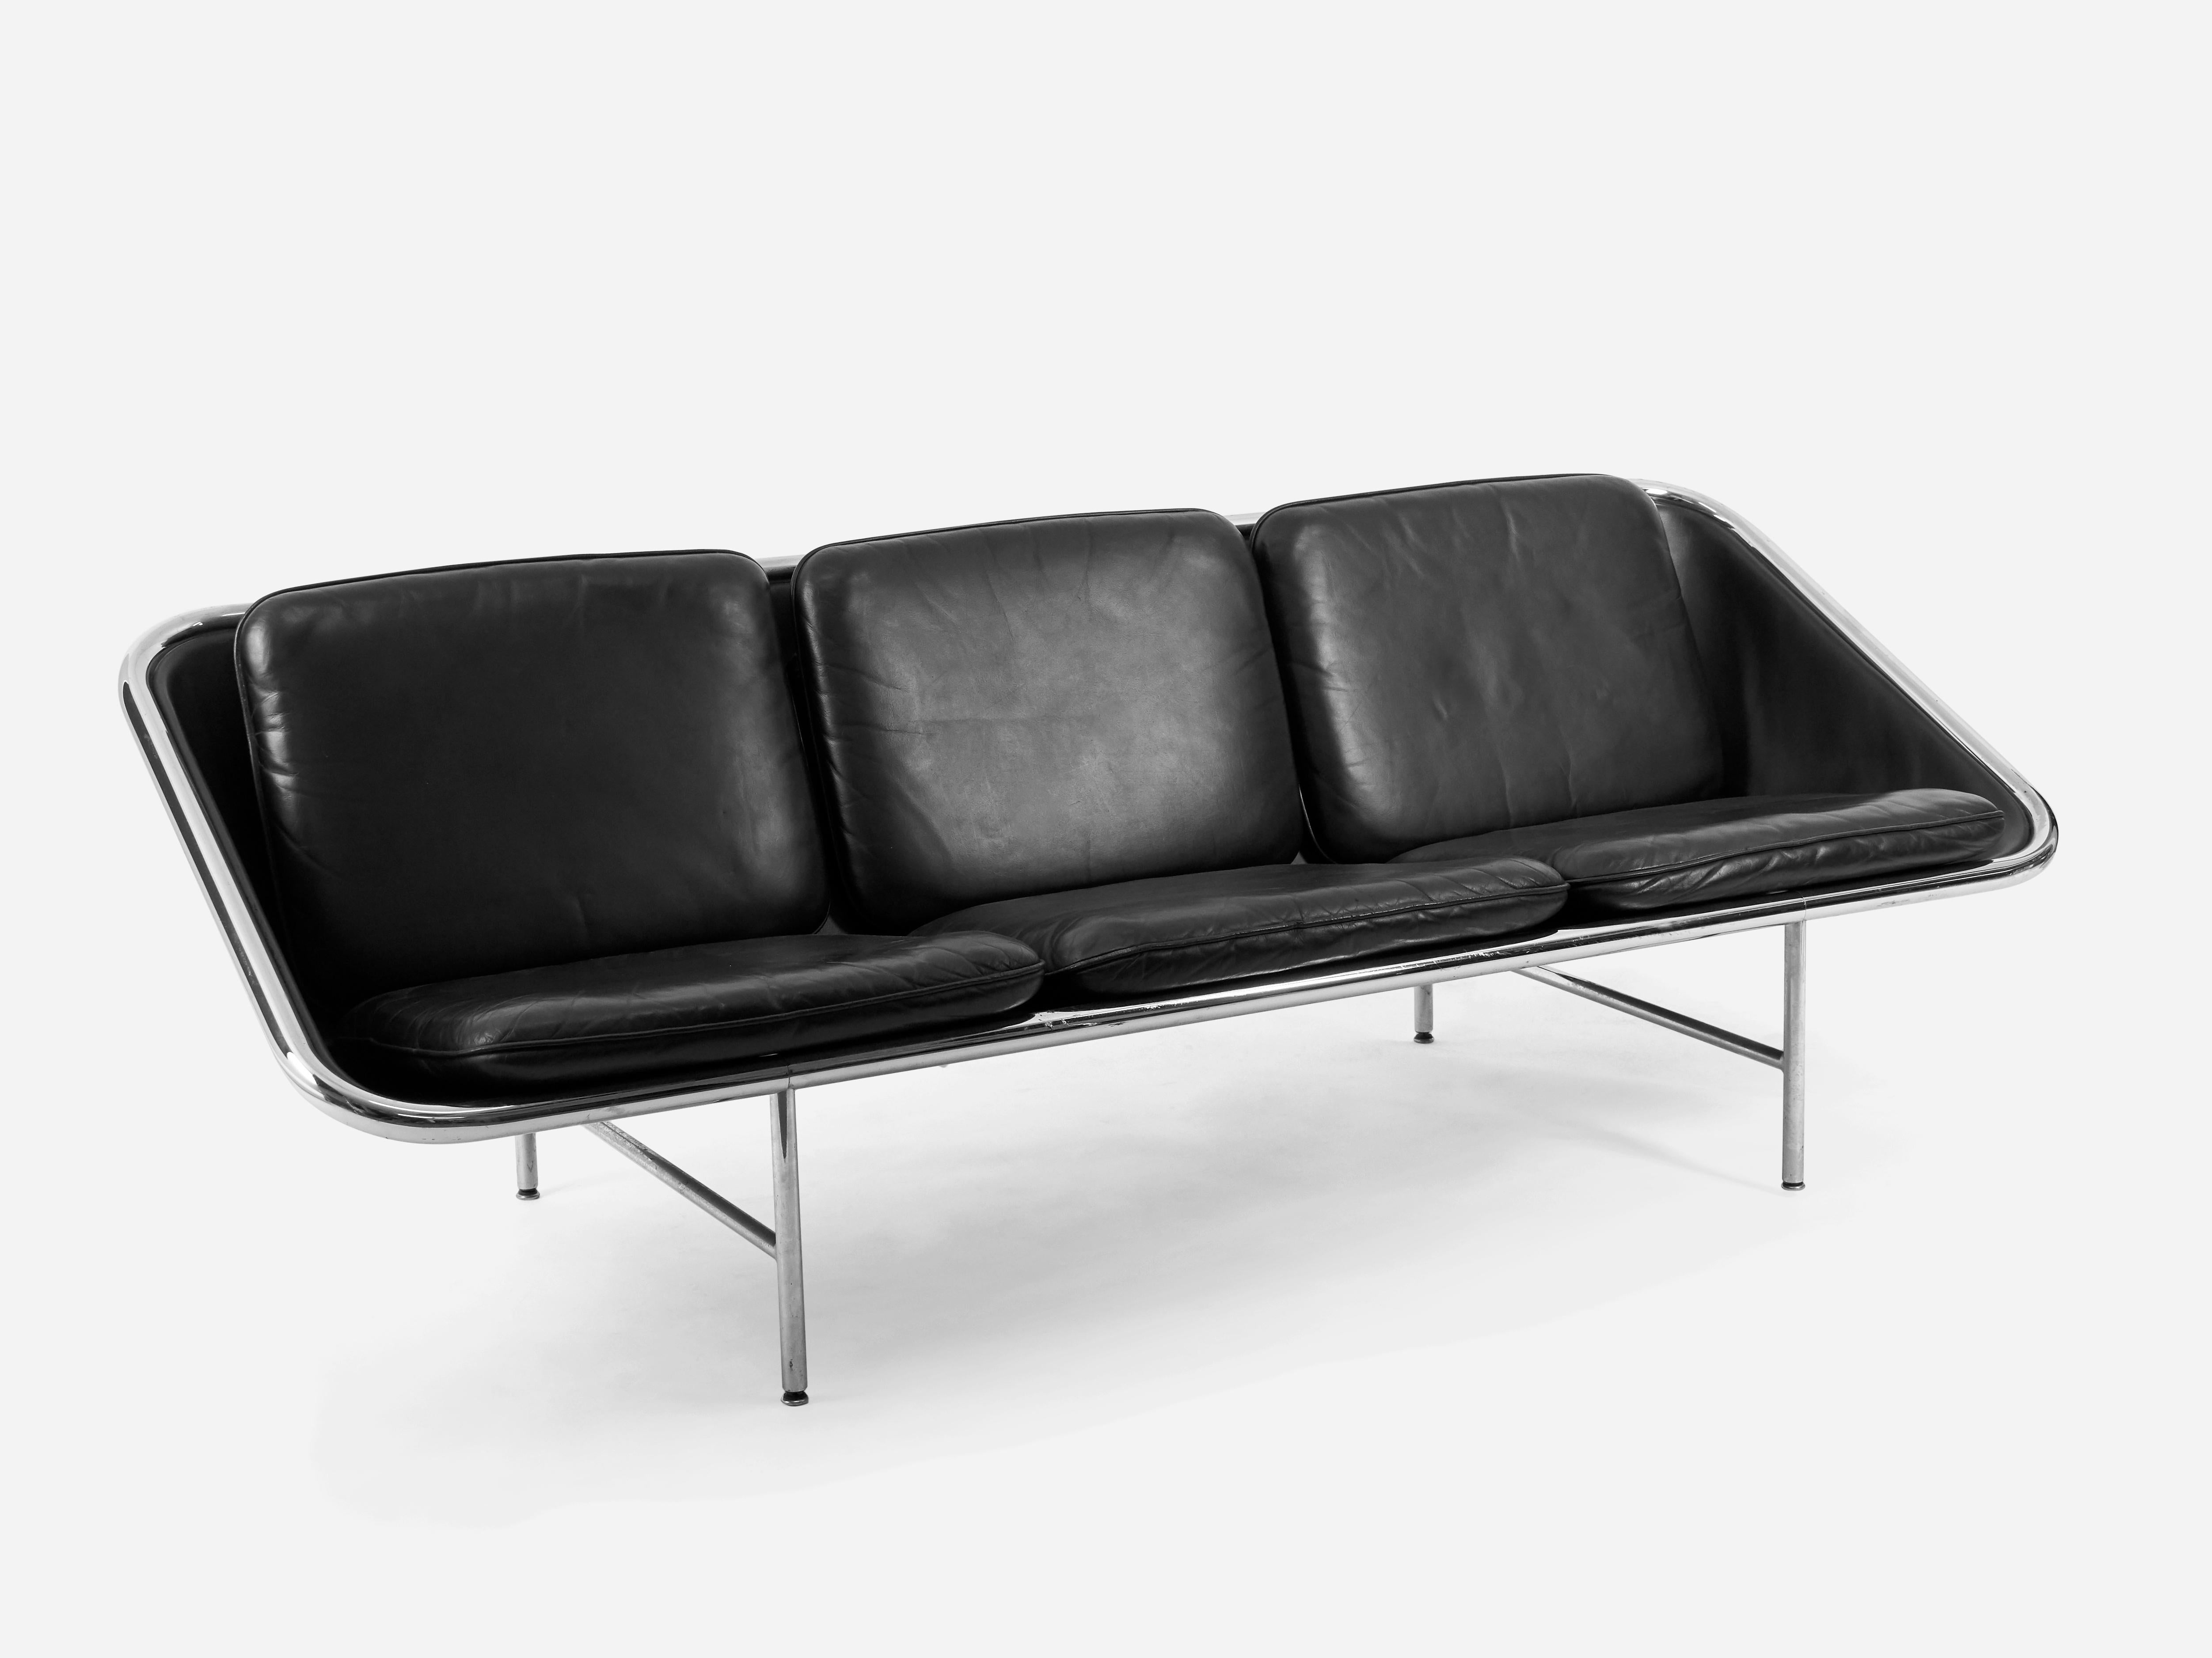 Sling sofa by George Nelson for Herman Miller. Black leather with chrome steel frame. Original leather cushions in great condition.